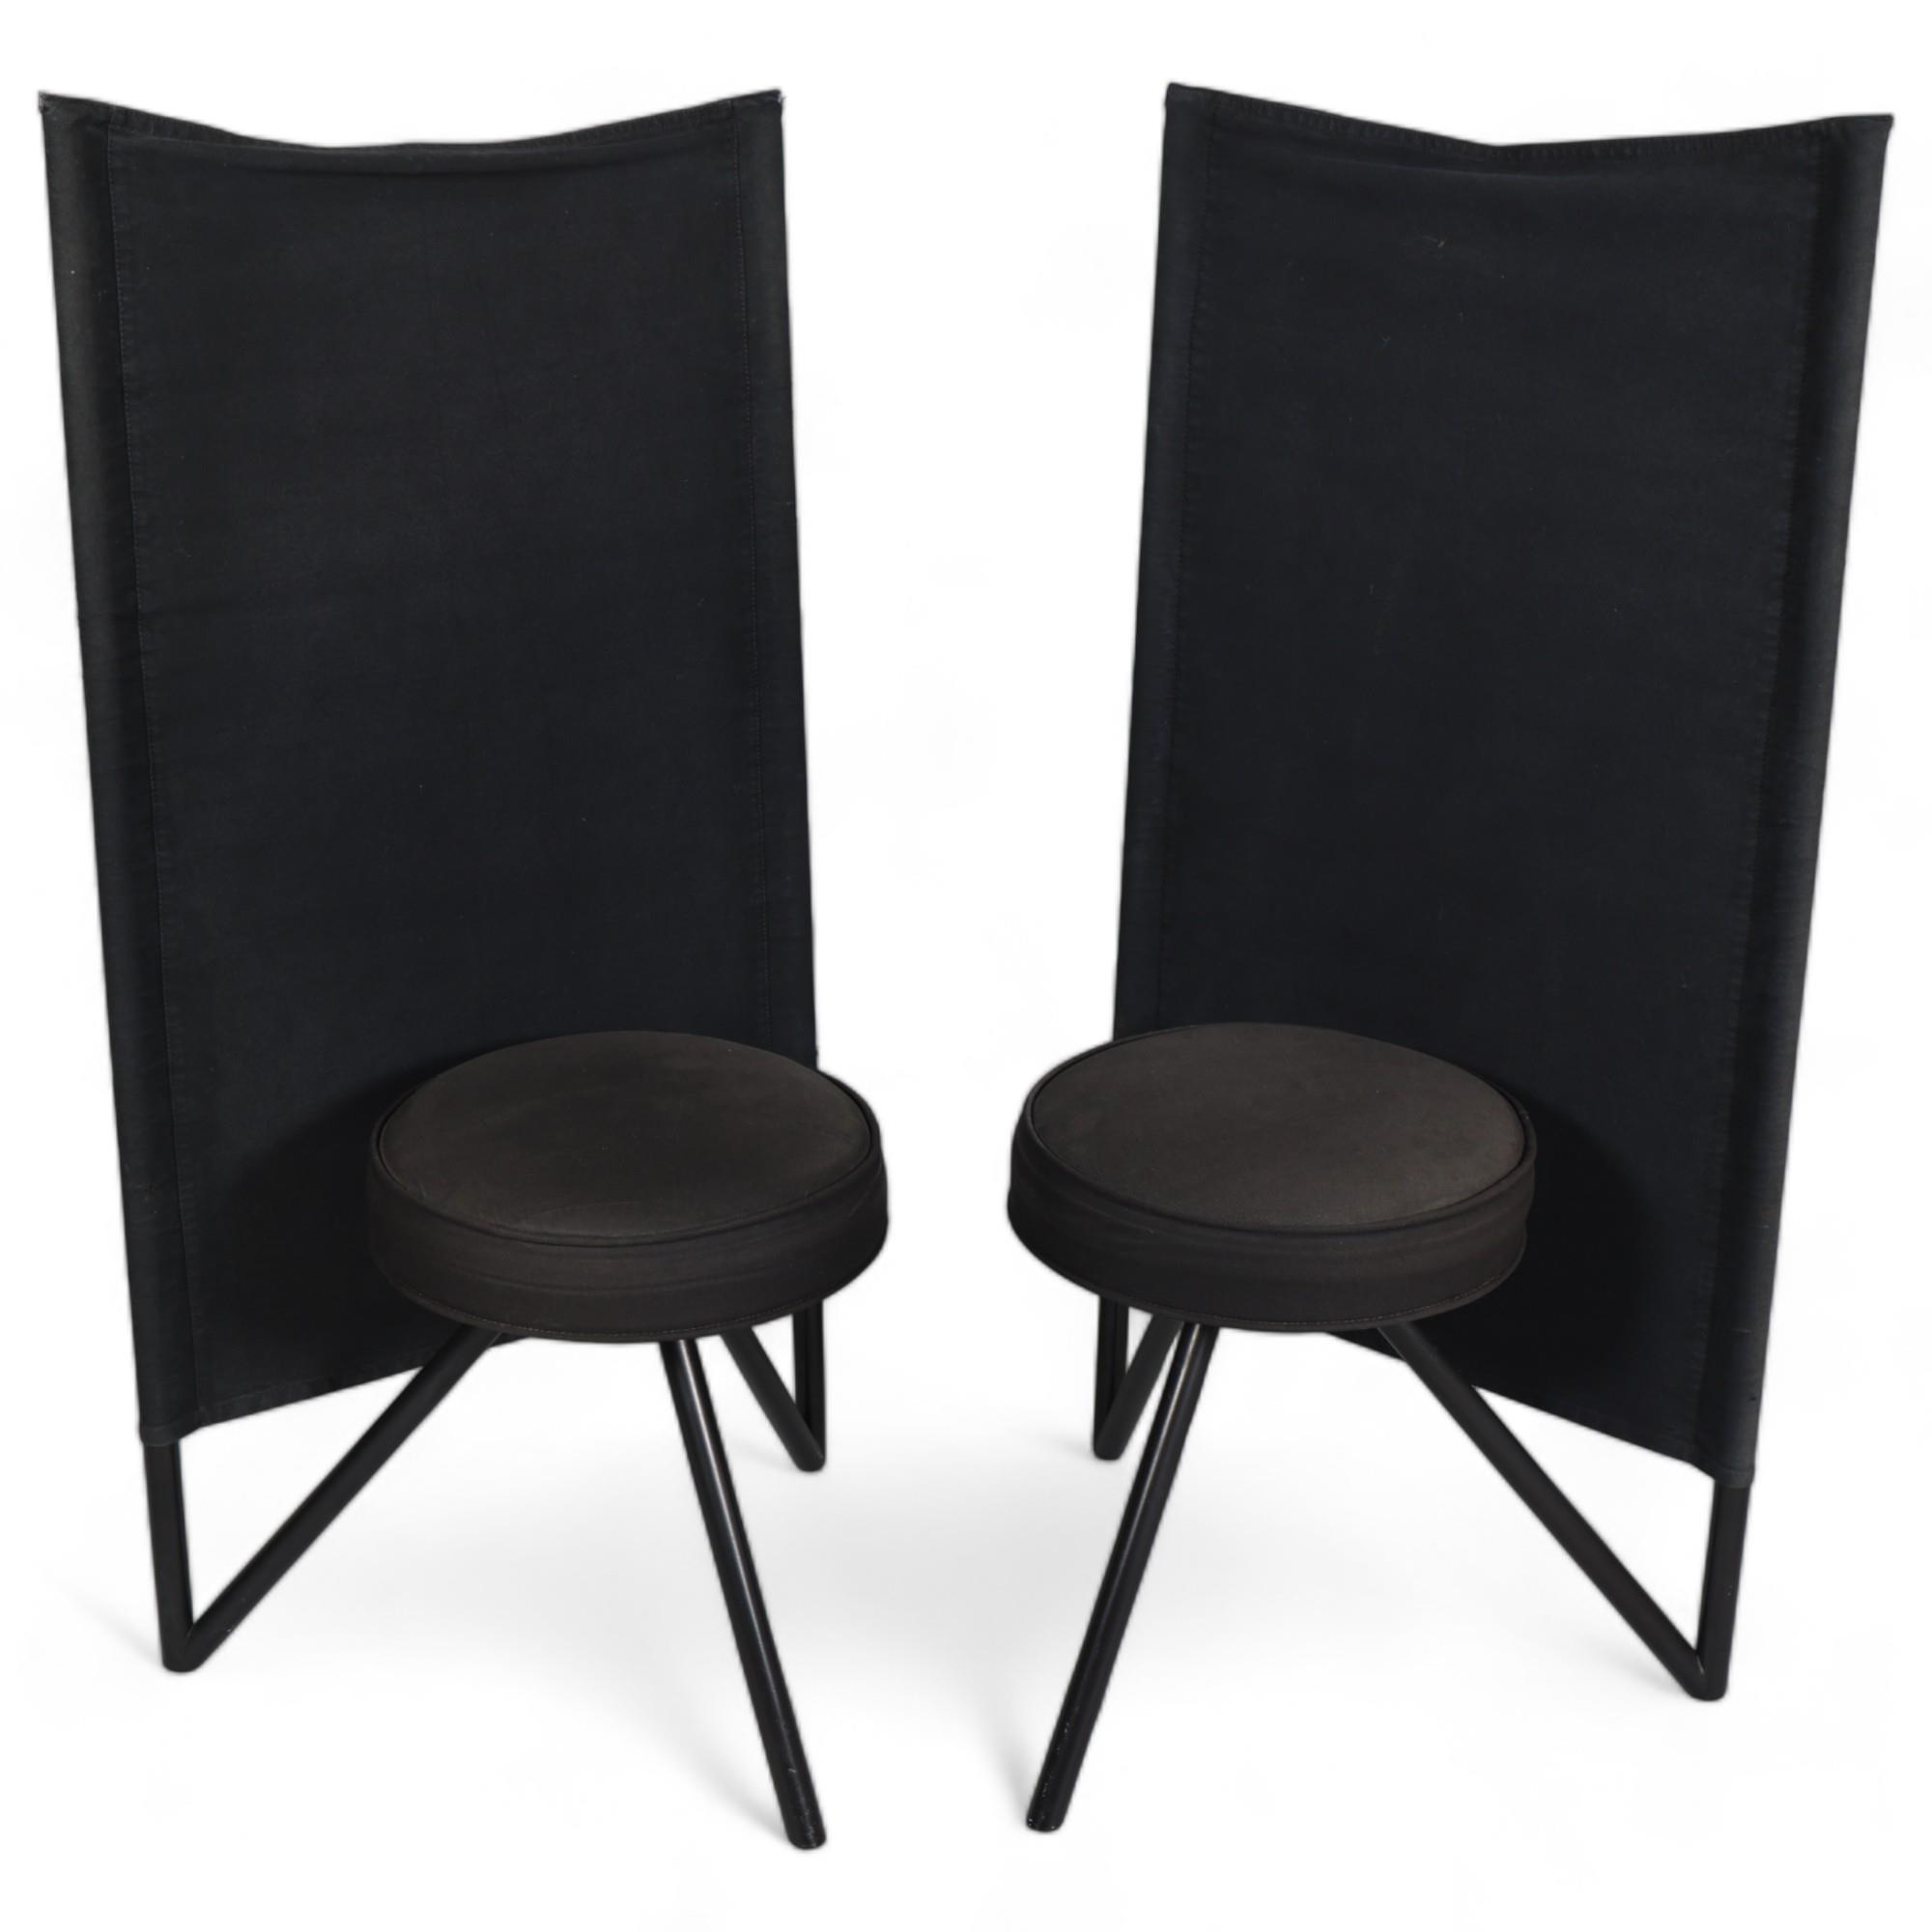 PHILIPPE STARCK for Disform, a pair of 1980s' Miss Wirt chairs, black cotton upholstery on black